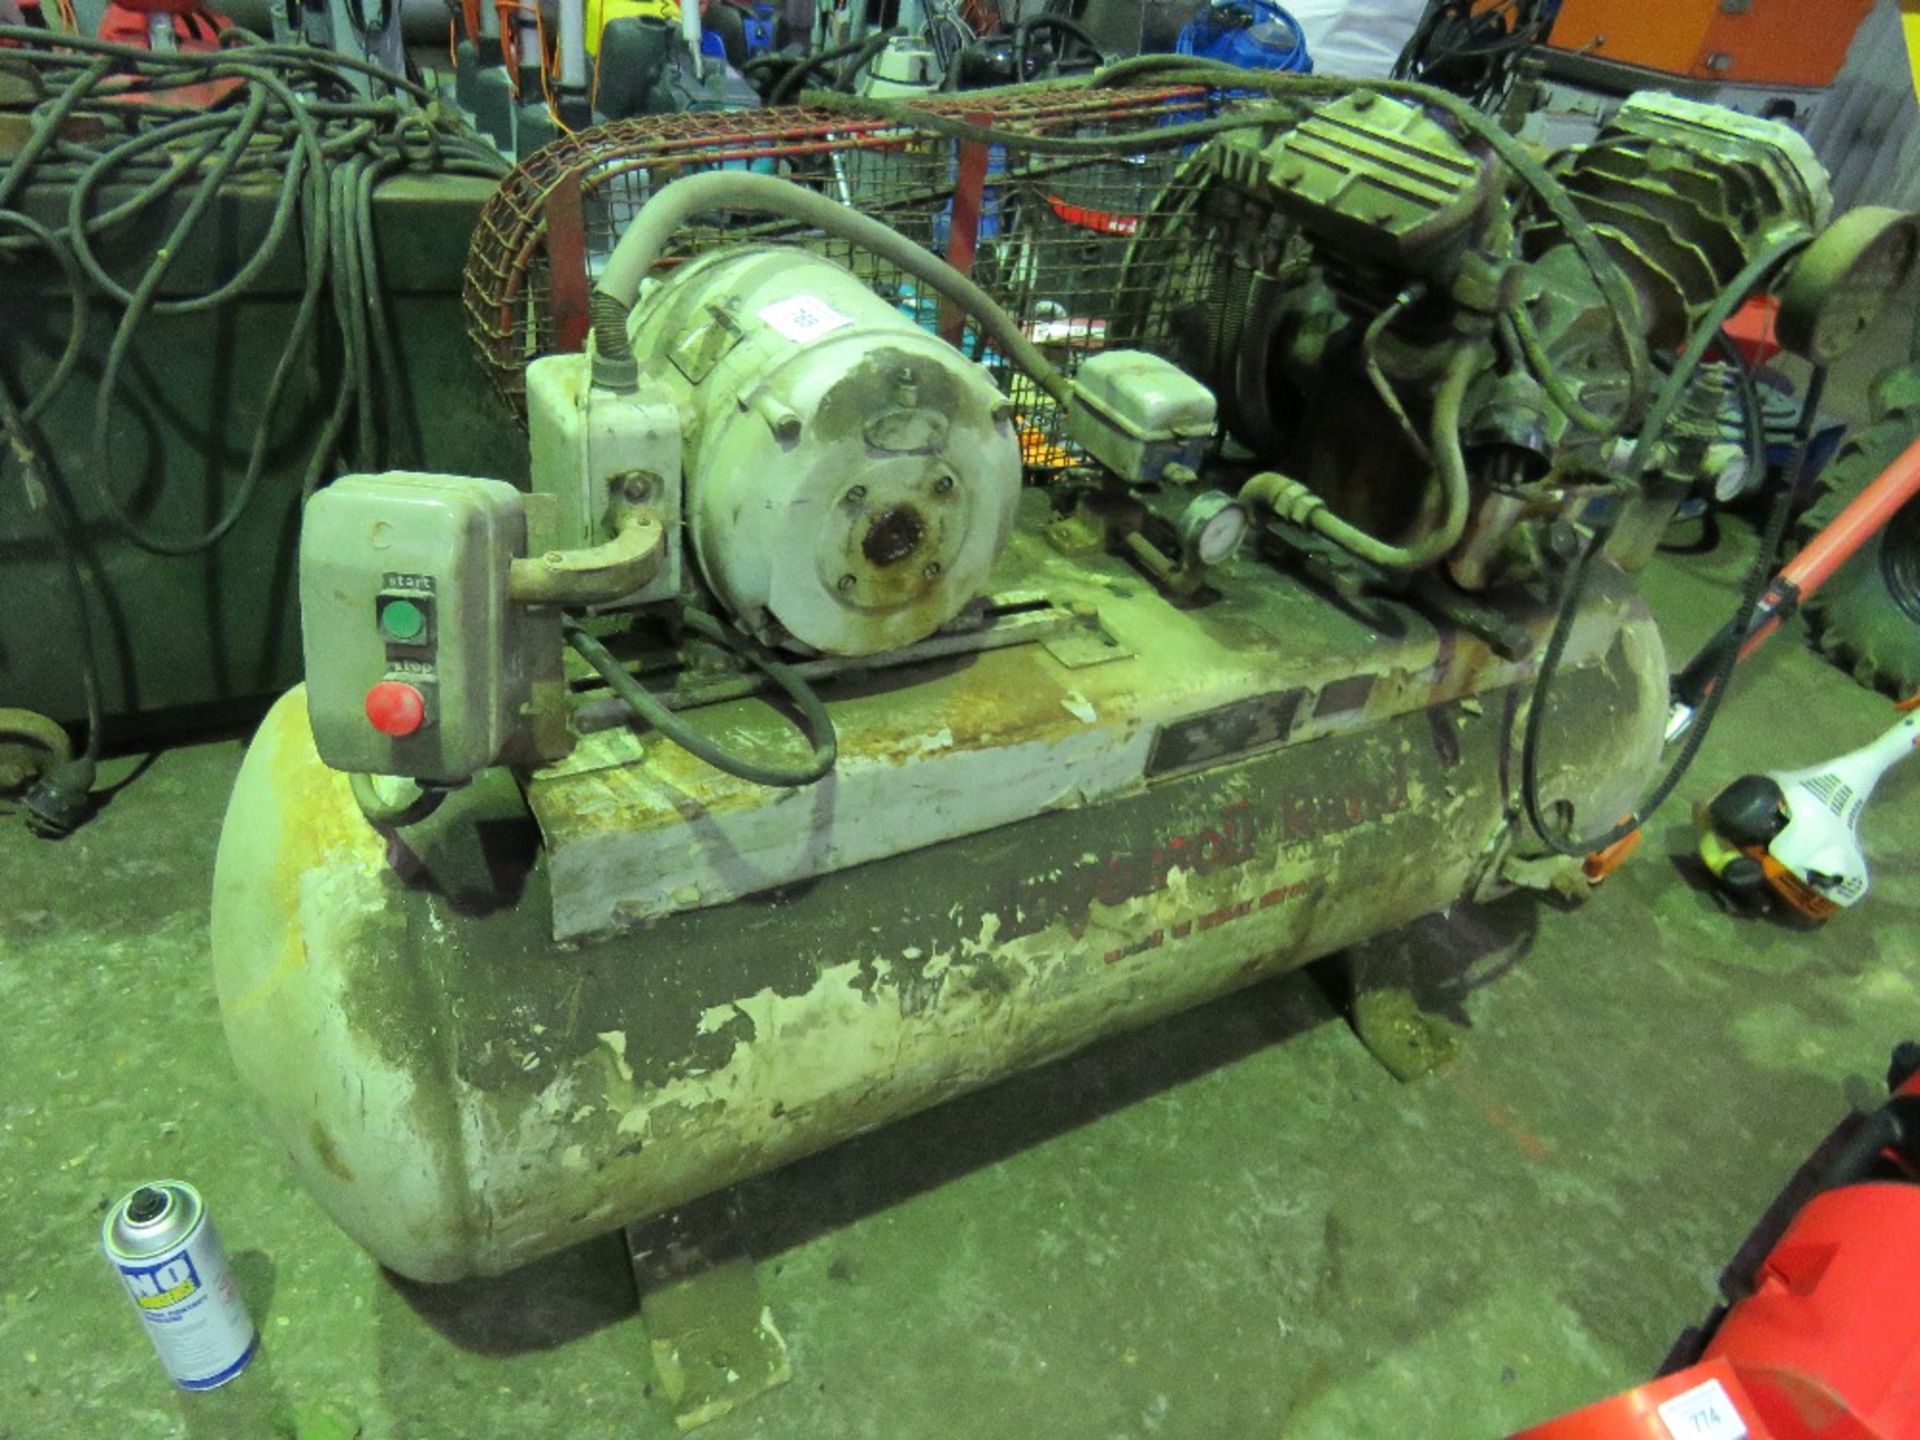 INGERSOLL RAND LARGE CAPACITY WORKSHOP COMPRESSOR This item is being item sold under AMS…no vat will